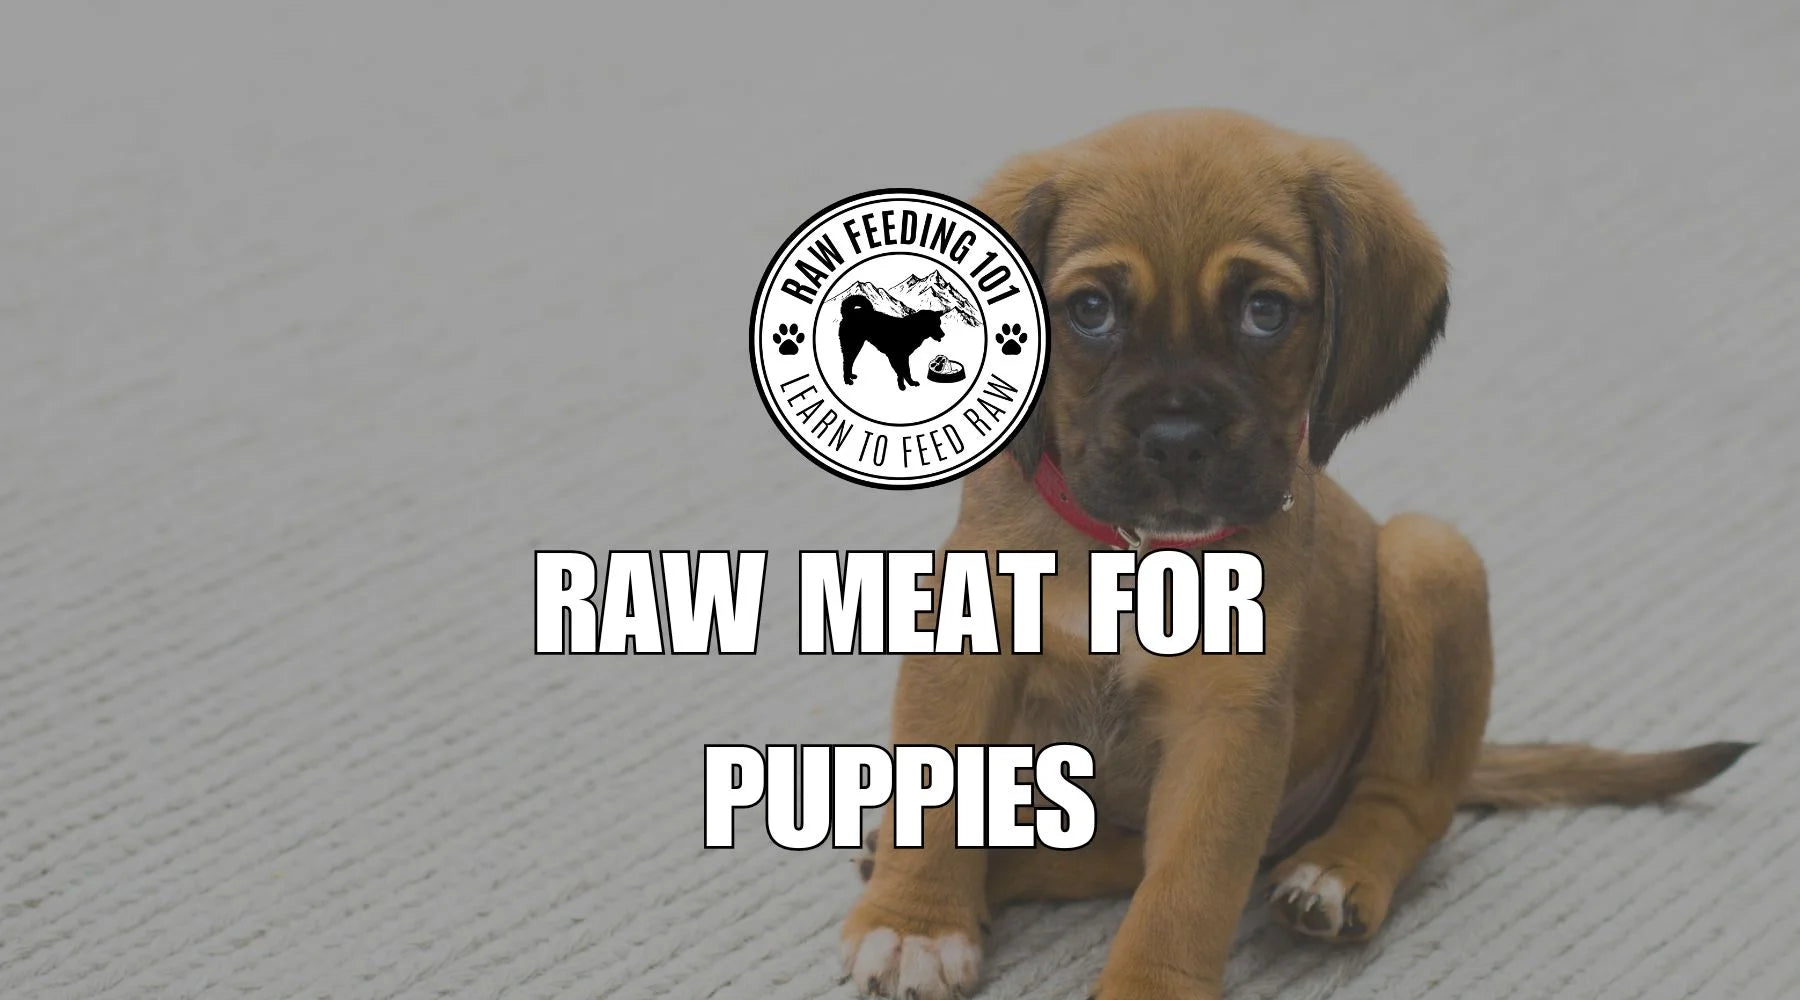 Can Puppies Eat Raw Meat?